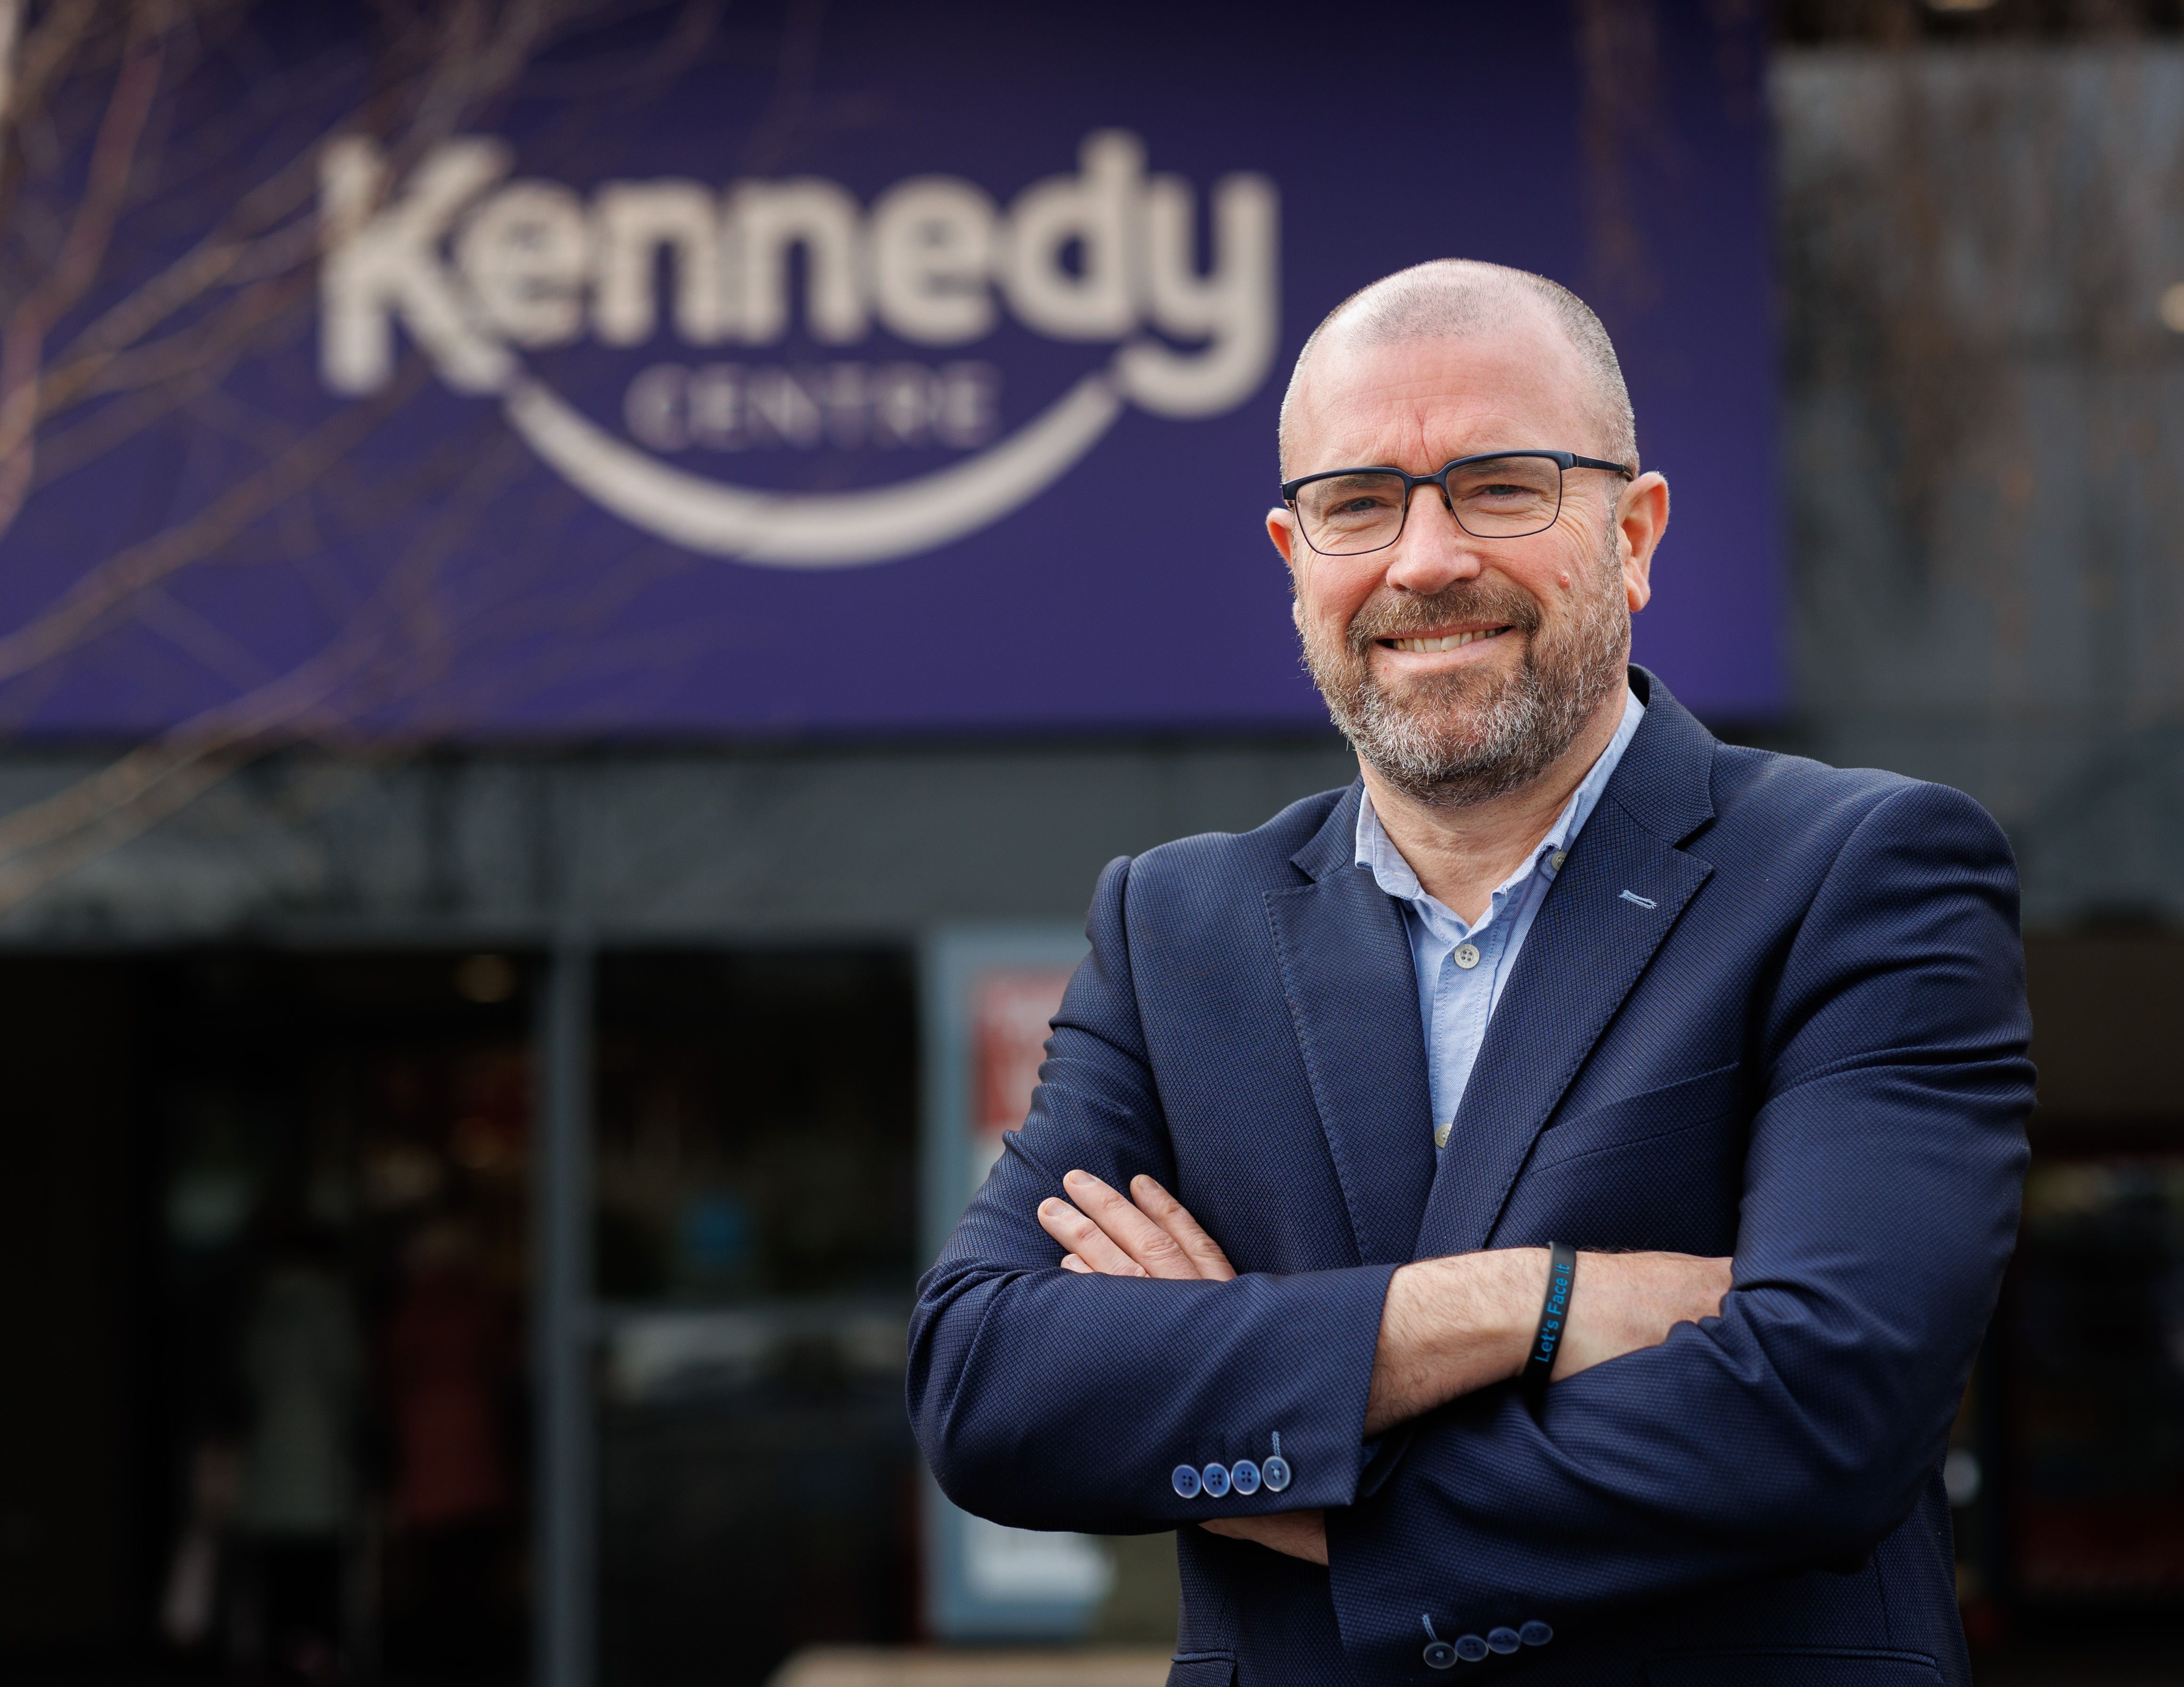 SUCCESS: John Jones, Kennedy Centre Manager, is delighted to announce footfall increase within the centre